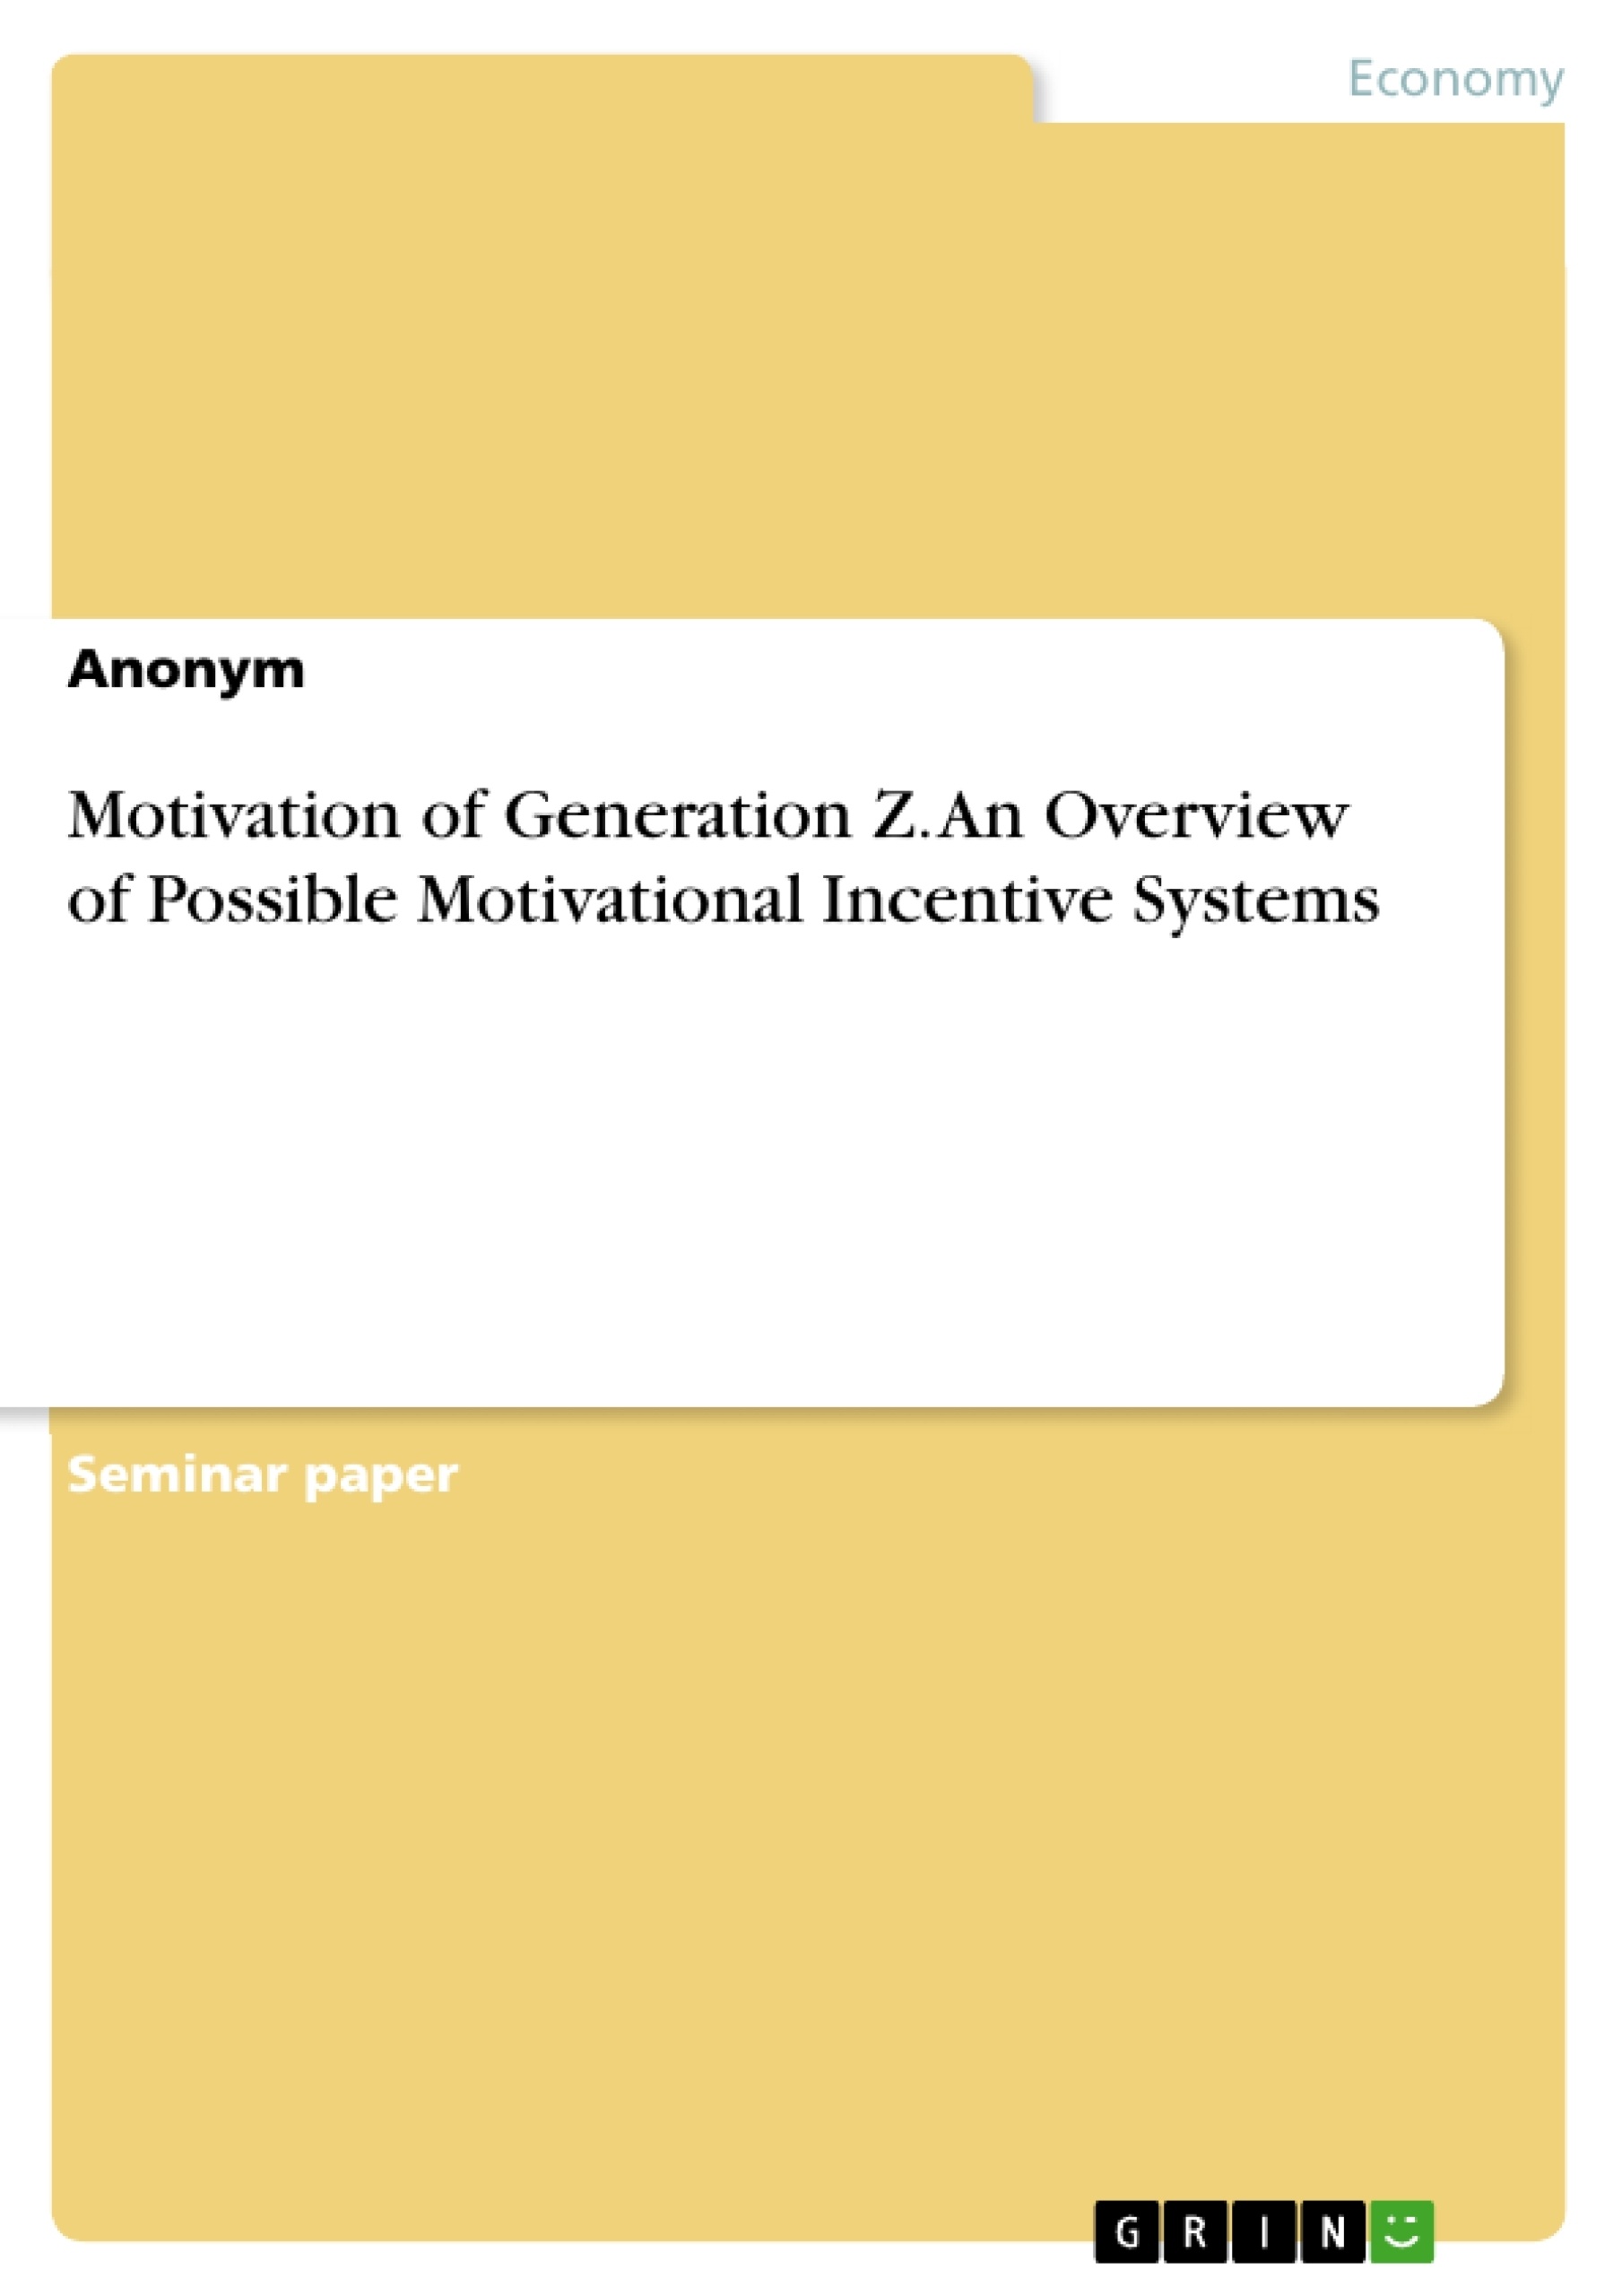 Title: Motivation of Generation Z. An Overview of Possible Motivational Incentive Systems